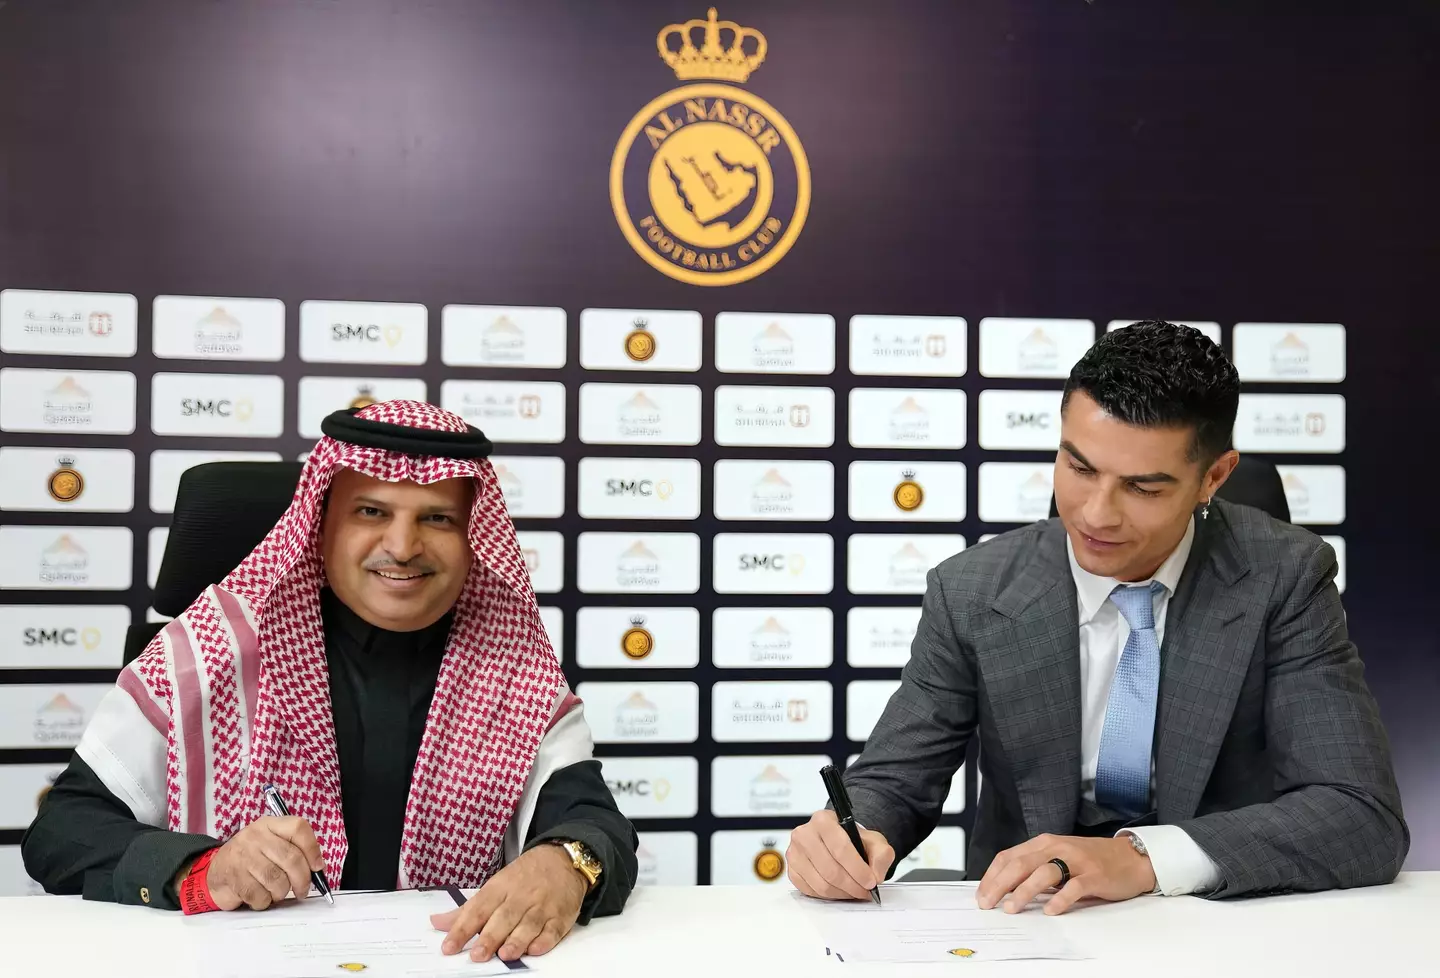 Ronaldo signing his contract with Al Nassr last week. (Image